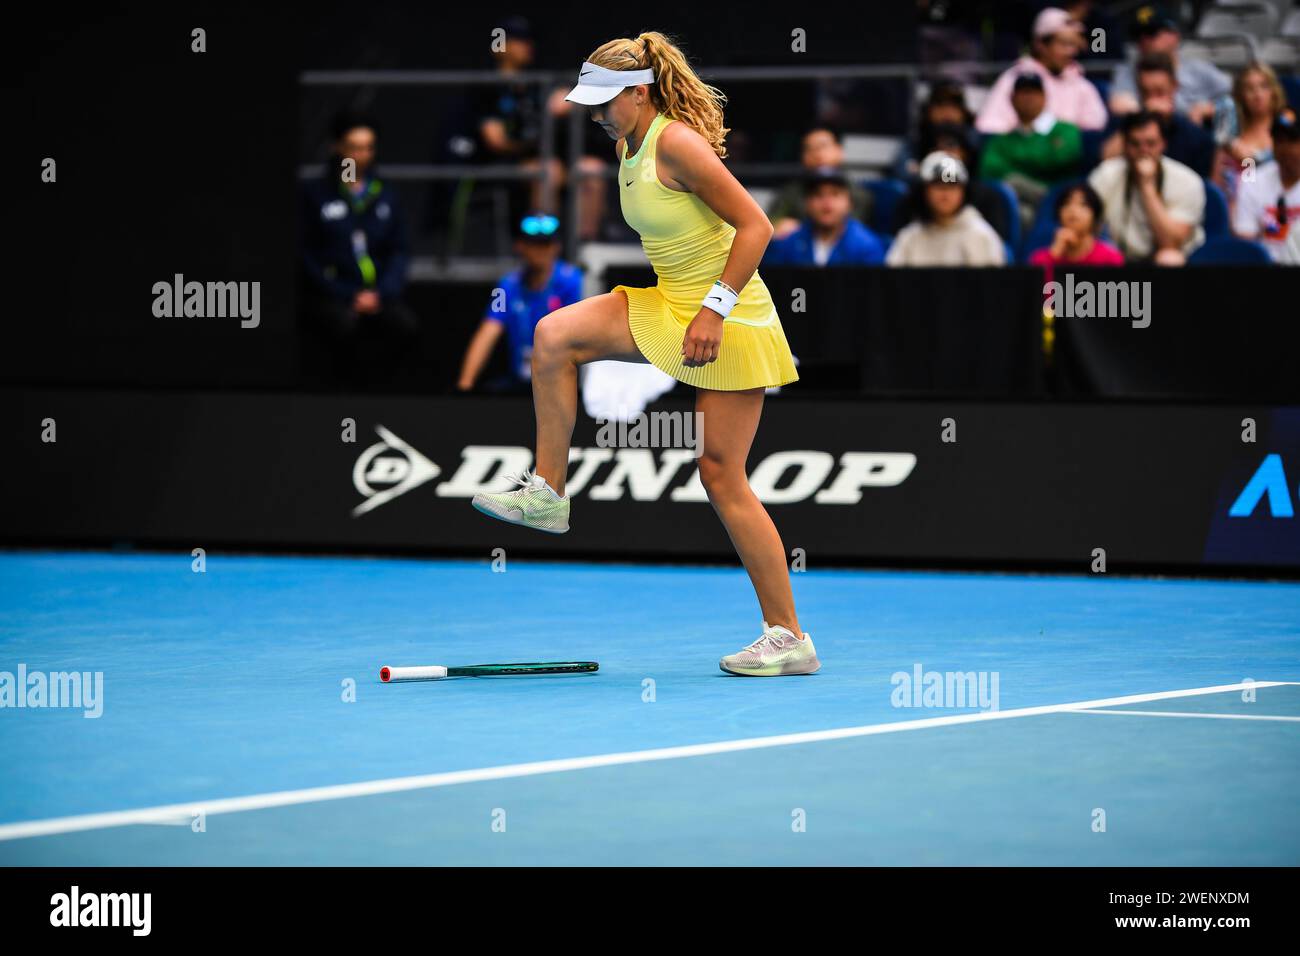 Mirra Andreeva of Russia seen playing stepping on a tennis Racket while playing against Barbora Krejcikova of Czech Republic (not in picture) during Round 4 match of the Australian Open Tennis Tournament at Melbourne Park. Barbora Krejcikova beats Mirra Andreeva in 3 sets with a score 4-6 6-3 6-2. Stock Photo